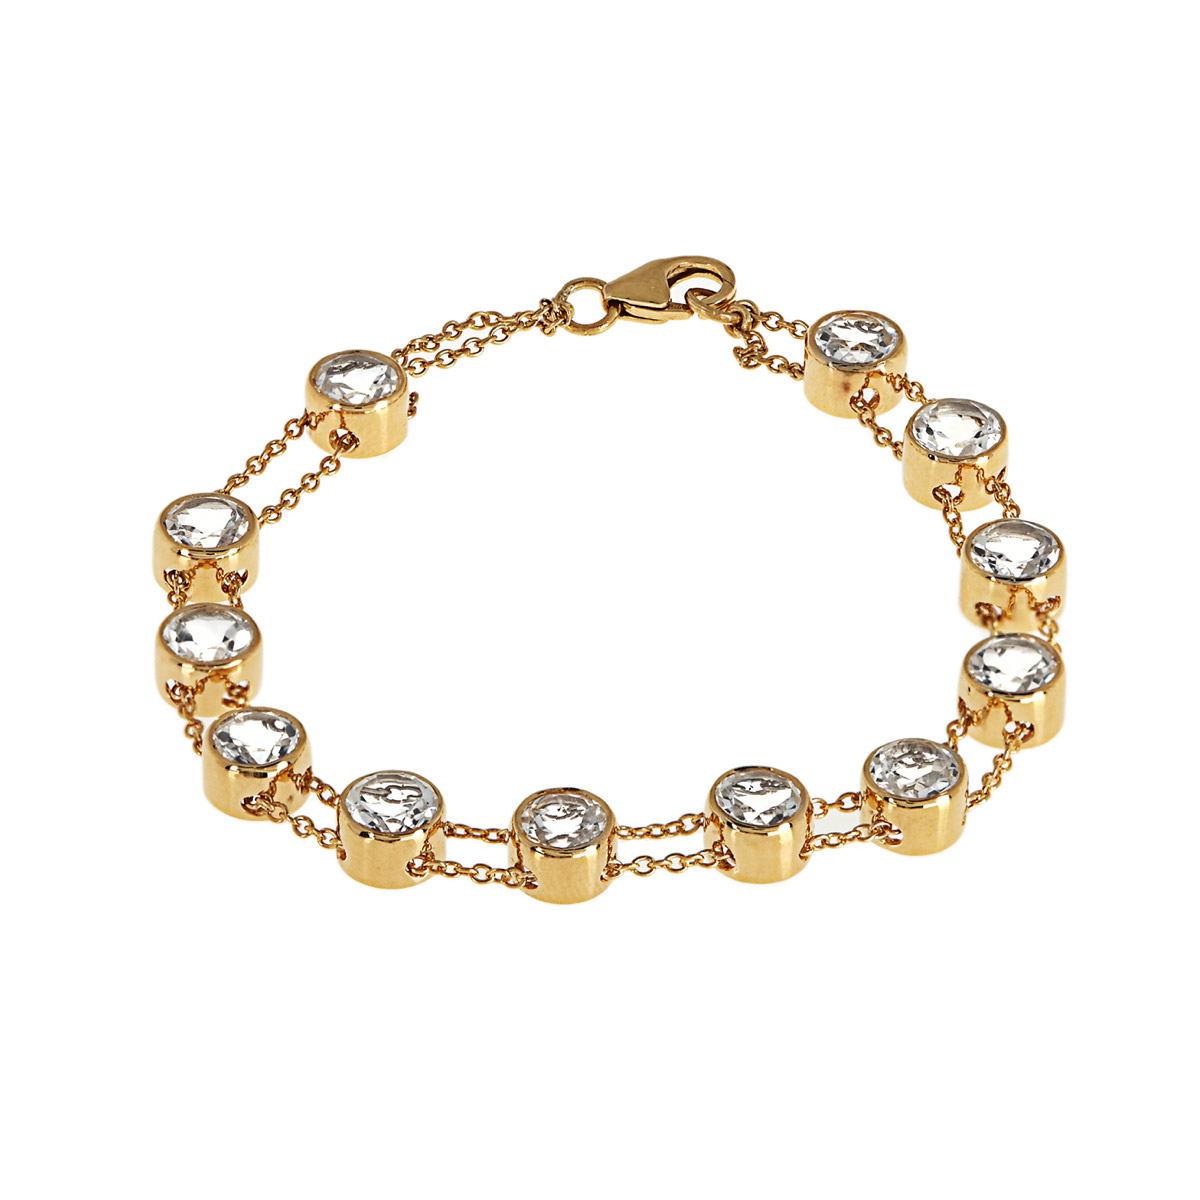 Topaz and gold-plated bracelet